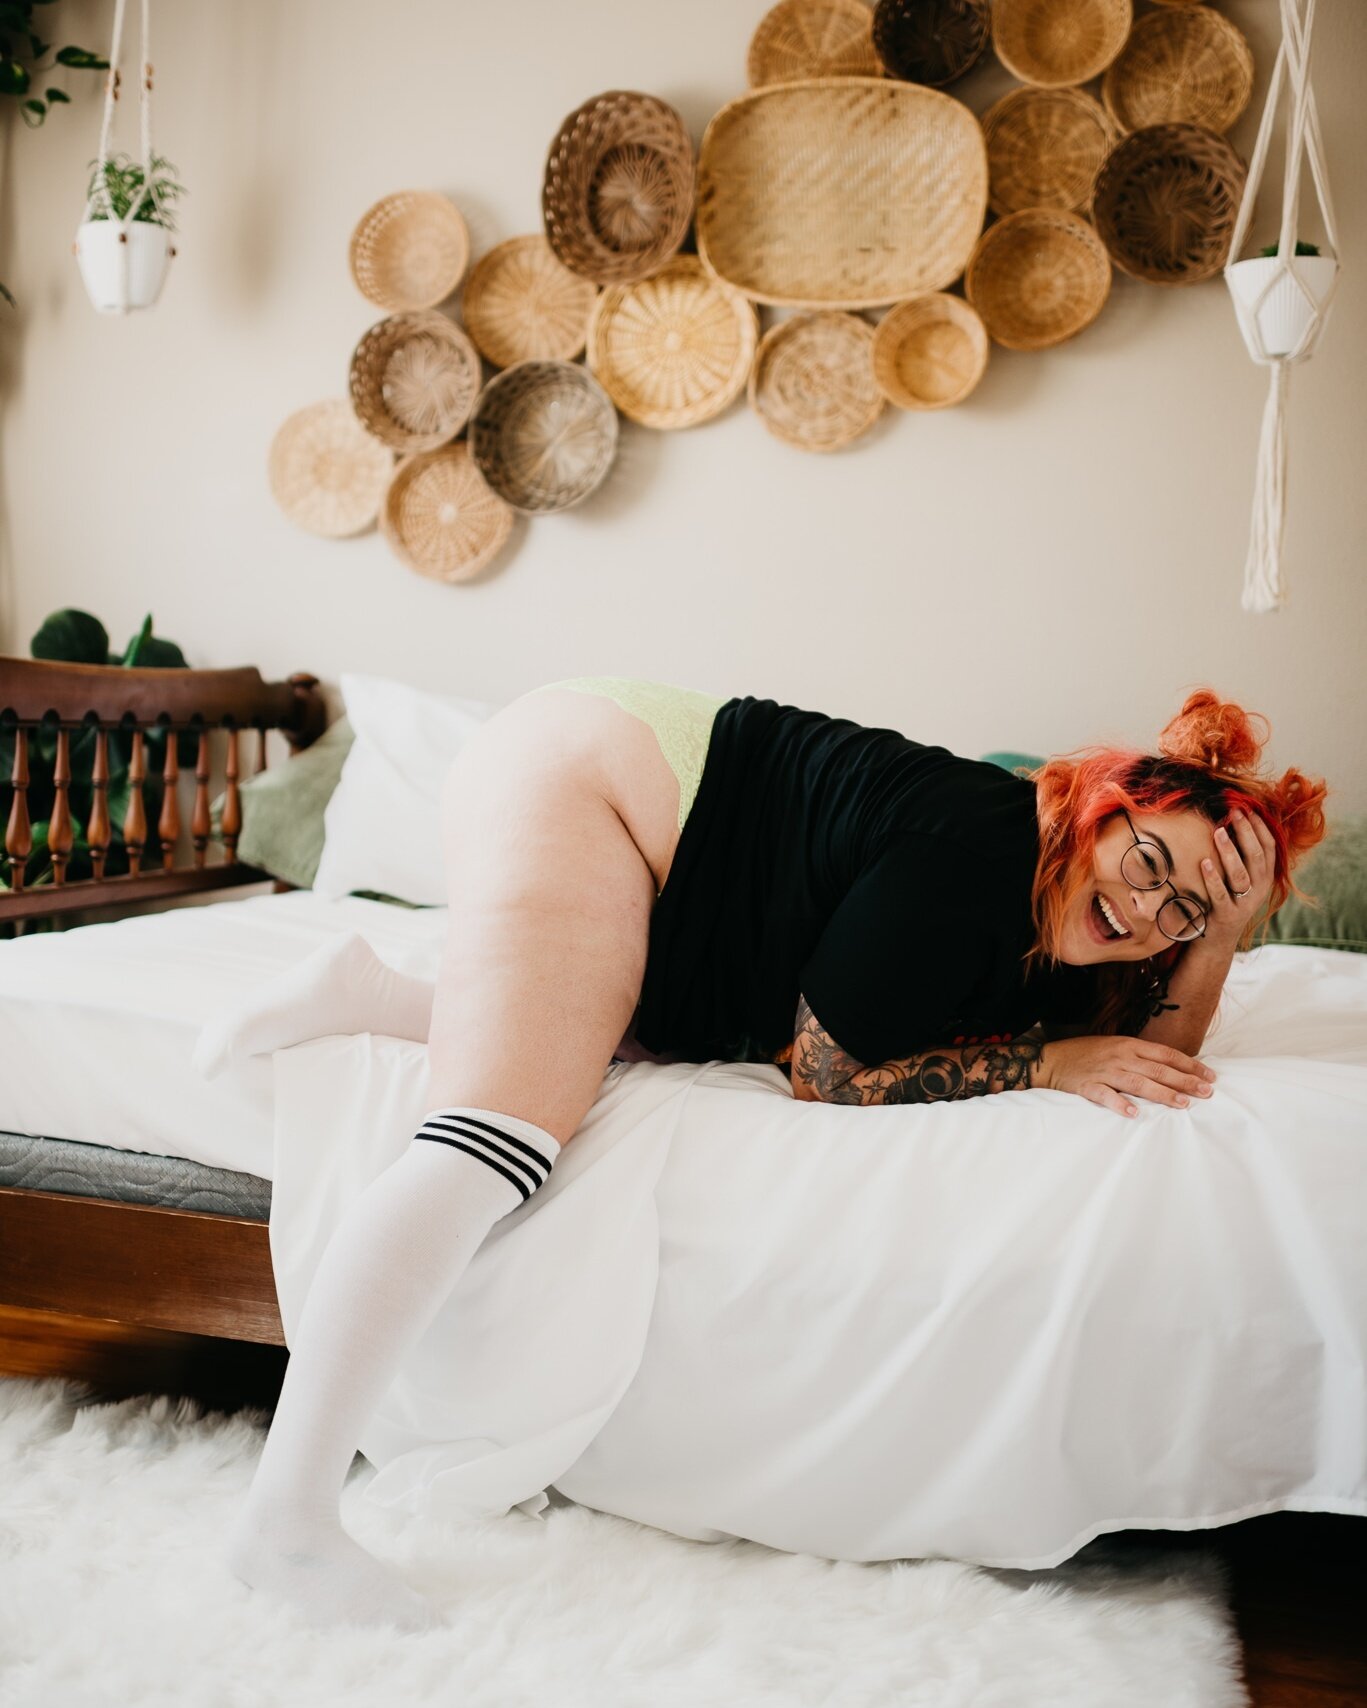 Your boudoir photos don't have to look like everyone else's. Put your hair in space buns, show up wearing a t-shirt and knee high stockings with a neon teddy and let's. do. this.⁣
⁣
Your photos should look and feel like YOU. Bring your PS5 controller